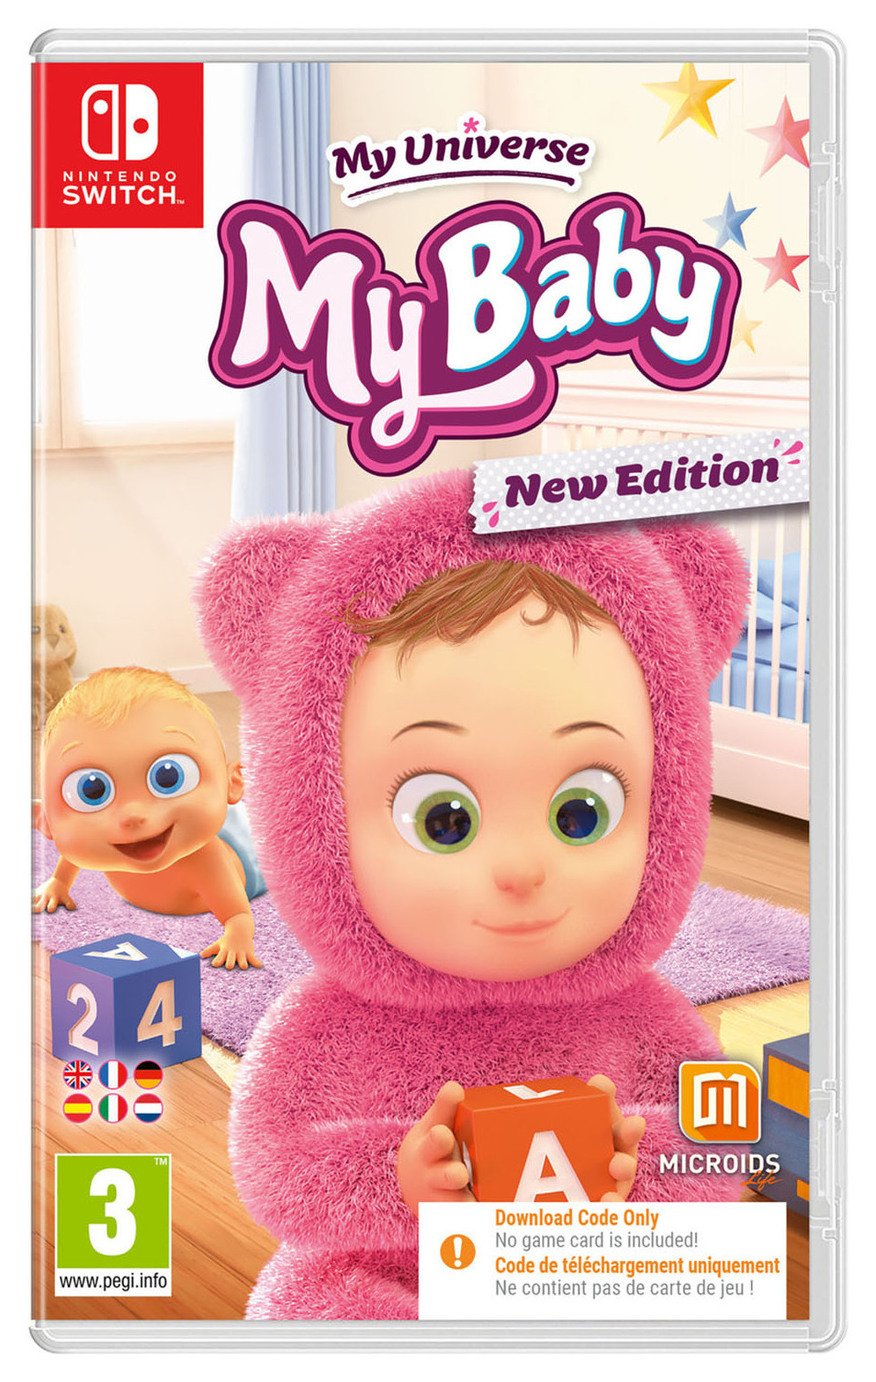 My Universe: My Baby New Edition Nintendo Switch Game